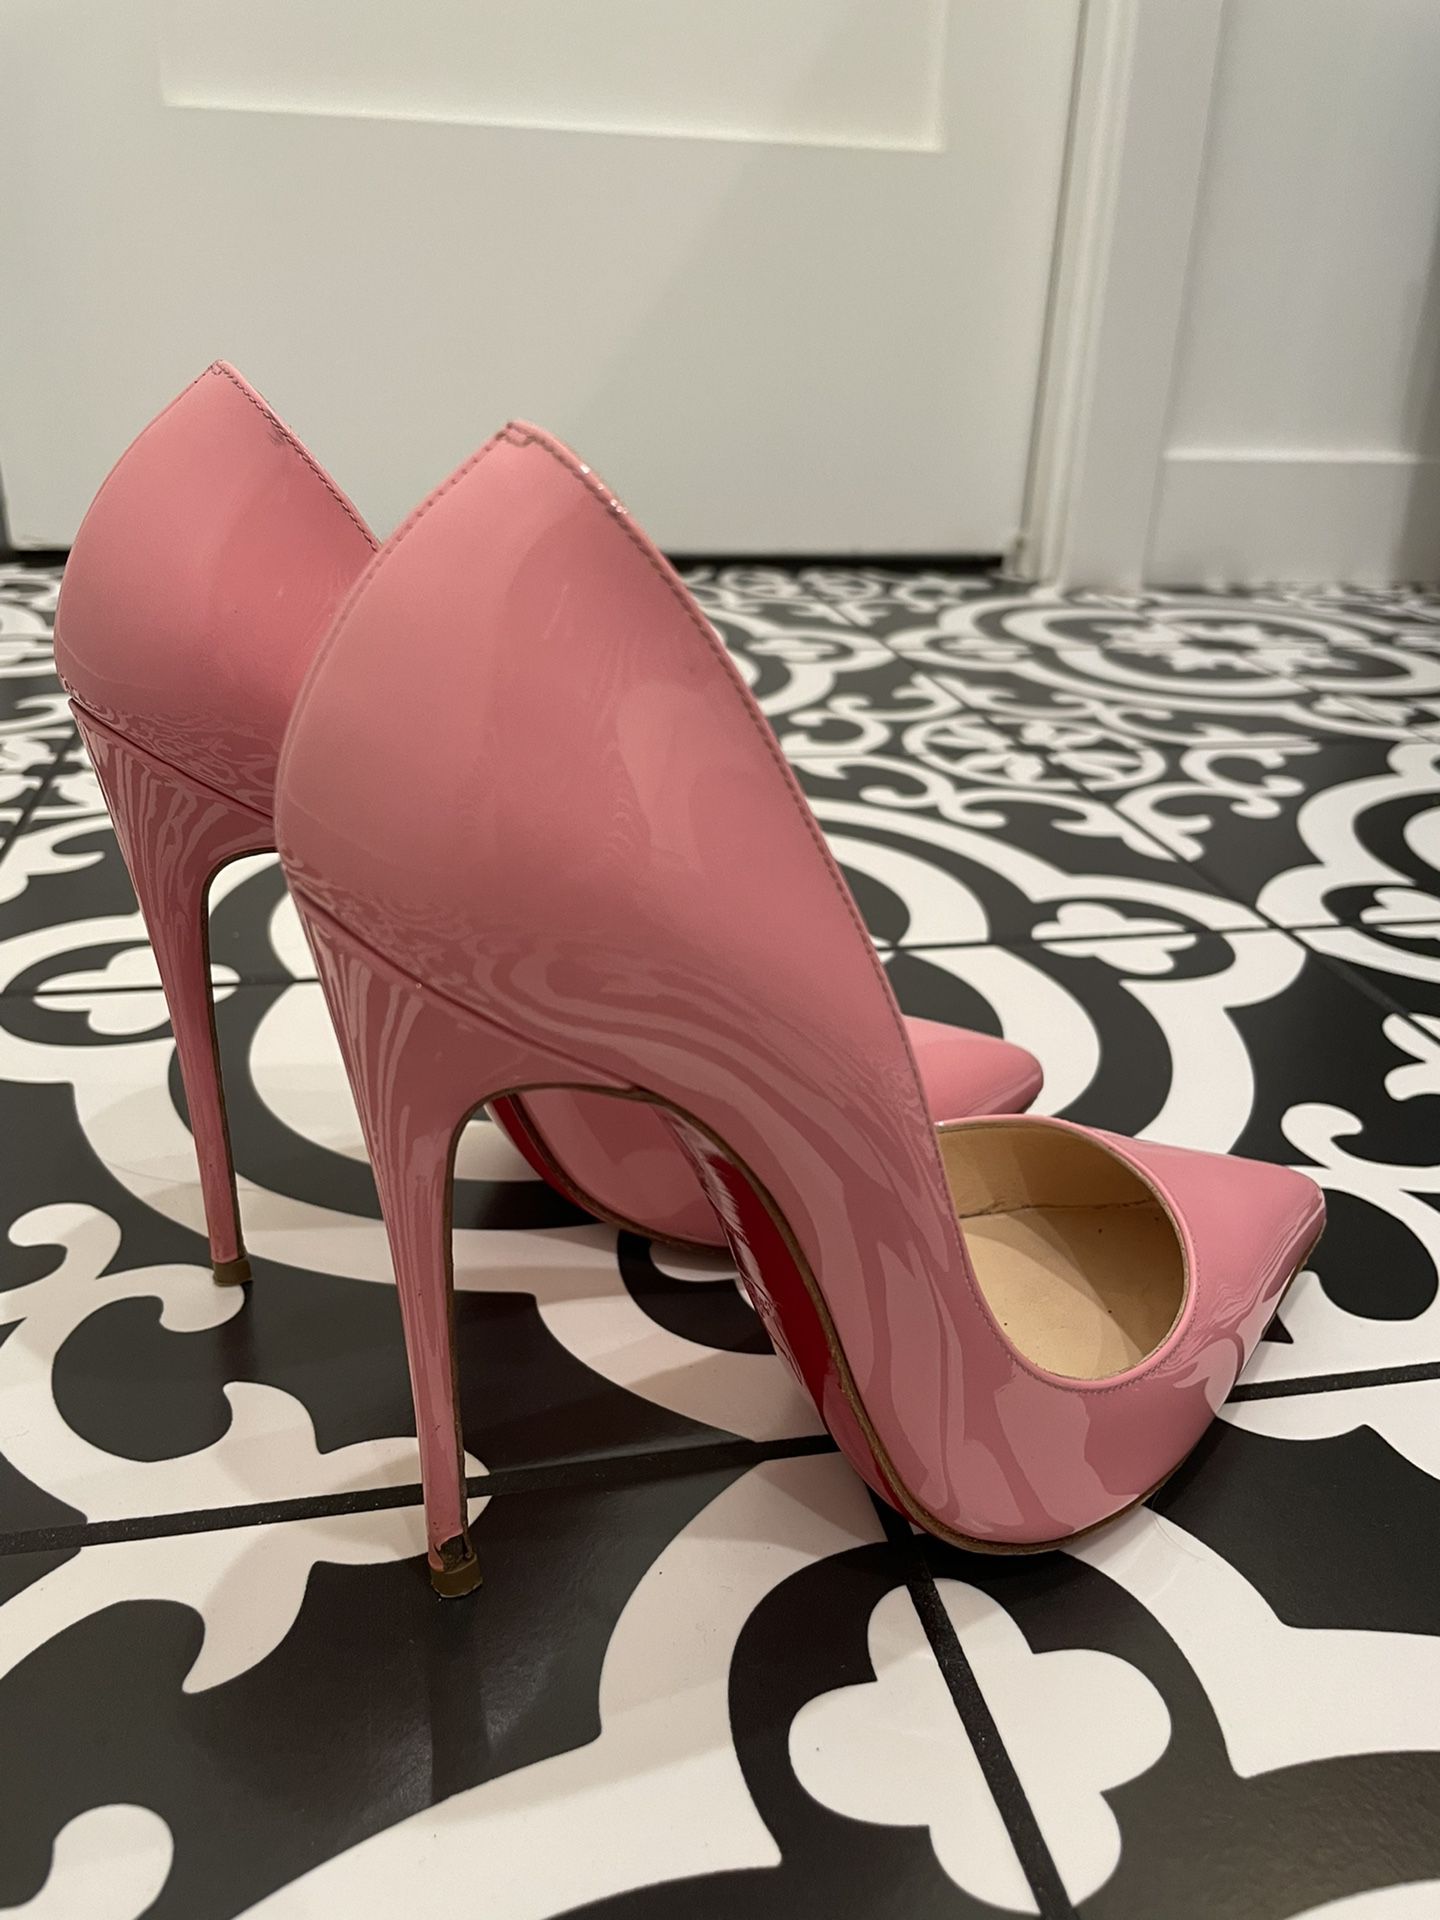 Christian Louboutin Pink Patent Pigalle 120 Heels. Size 36.5.